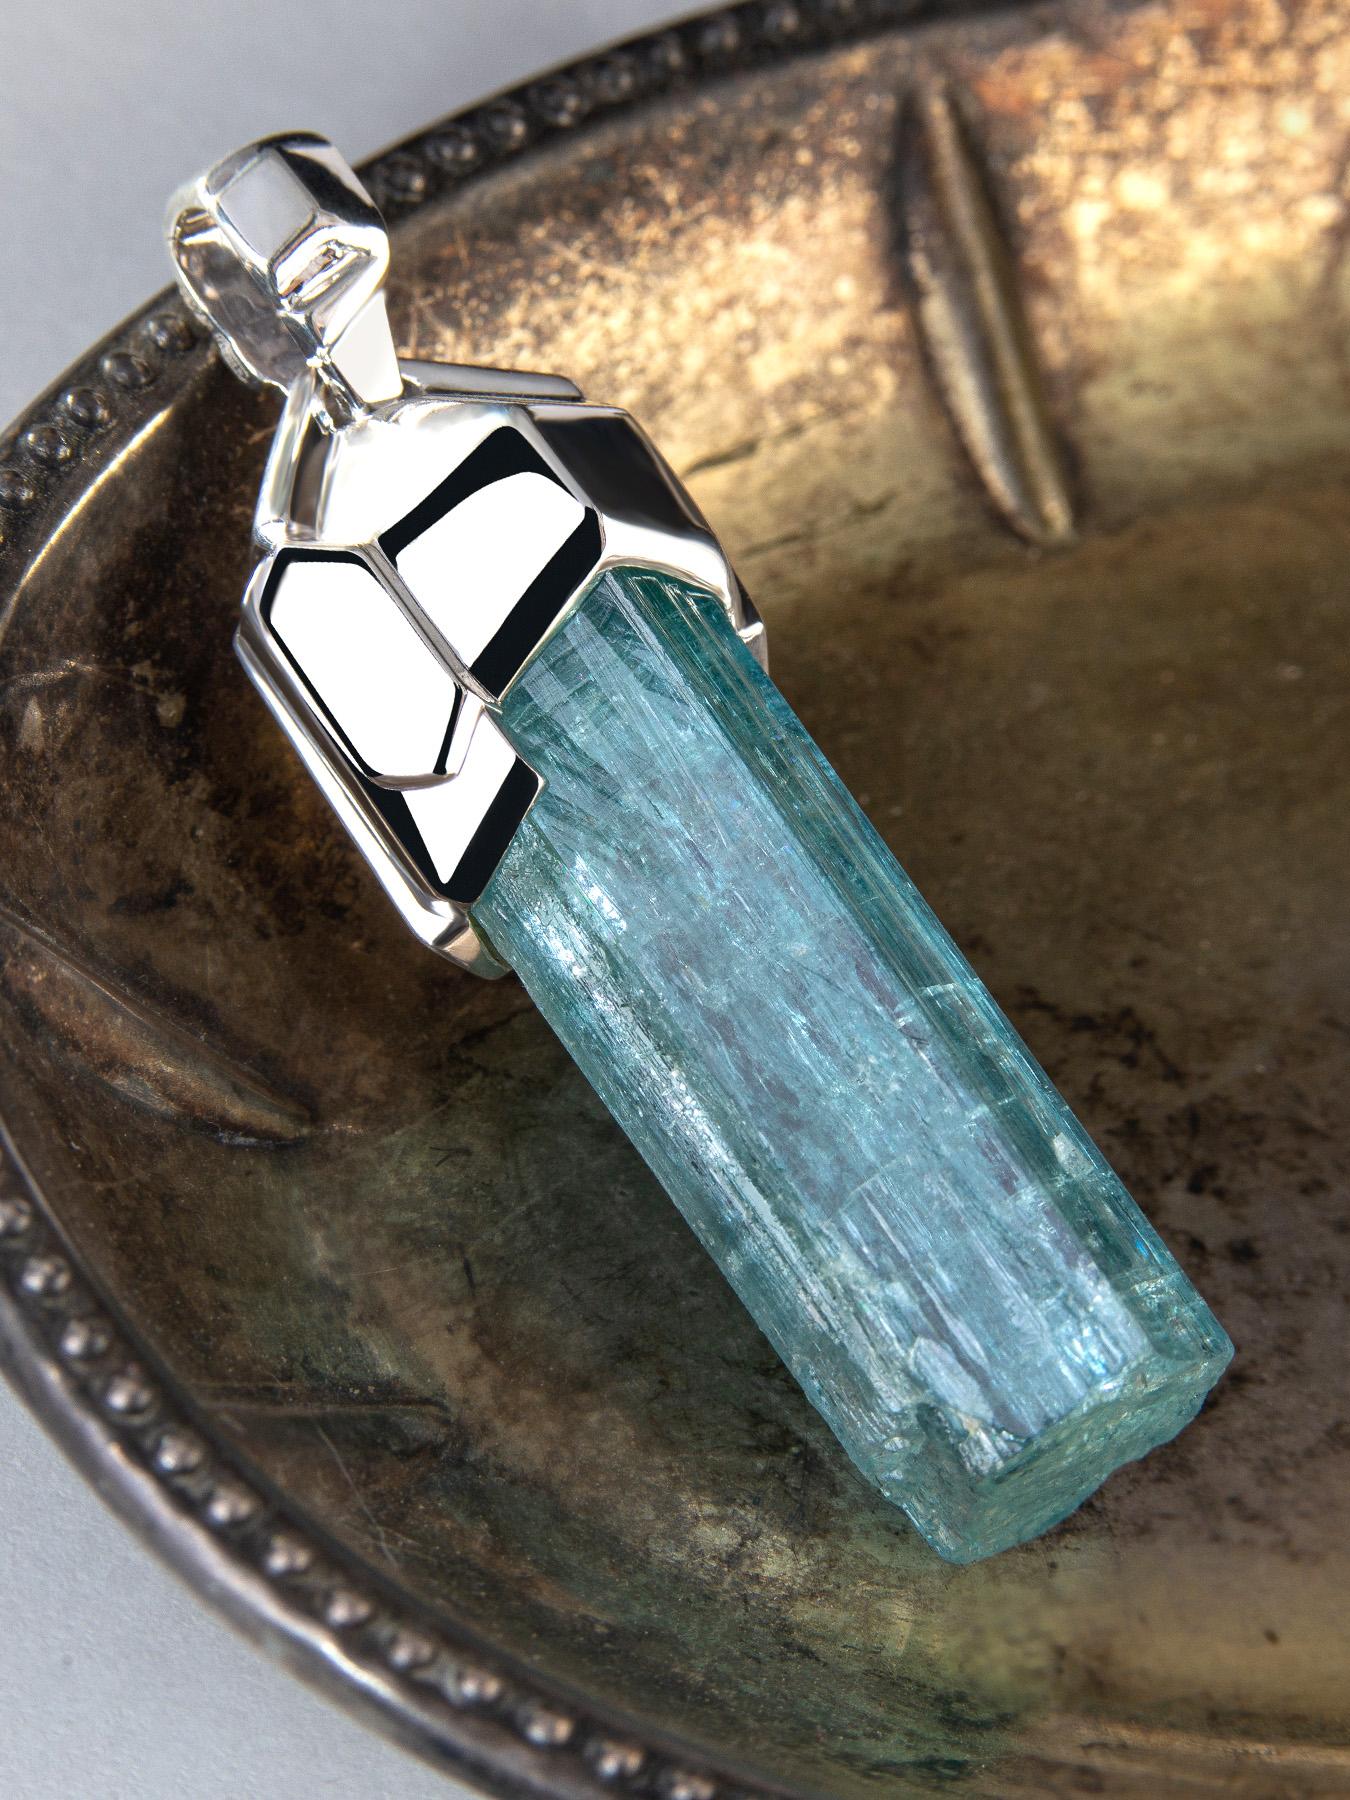 Large silver necklace with natural raw Aquamarine crystal
crystal measurements - 0.63 х 1.73 in / 16 х 44 mm
stone weight - 82 carats
pendant weight - 34.60 grams
pendant height  - 2.64 in / 67 mm

We ship our jewelry worldwide – for our customers